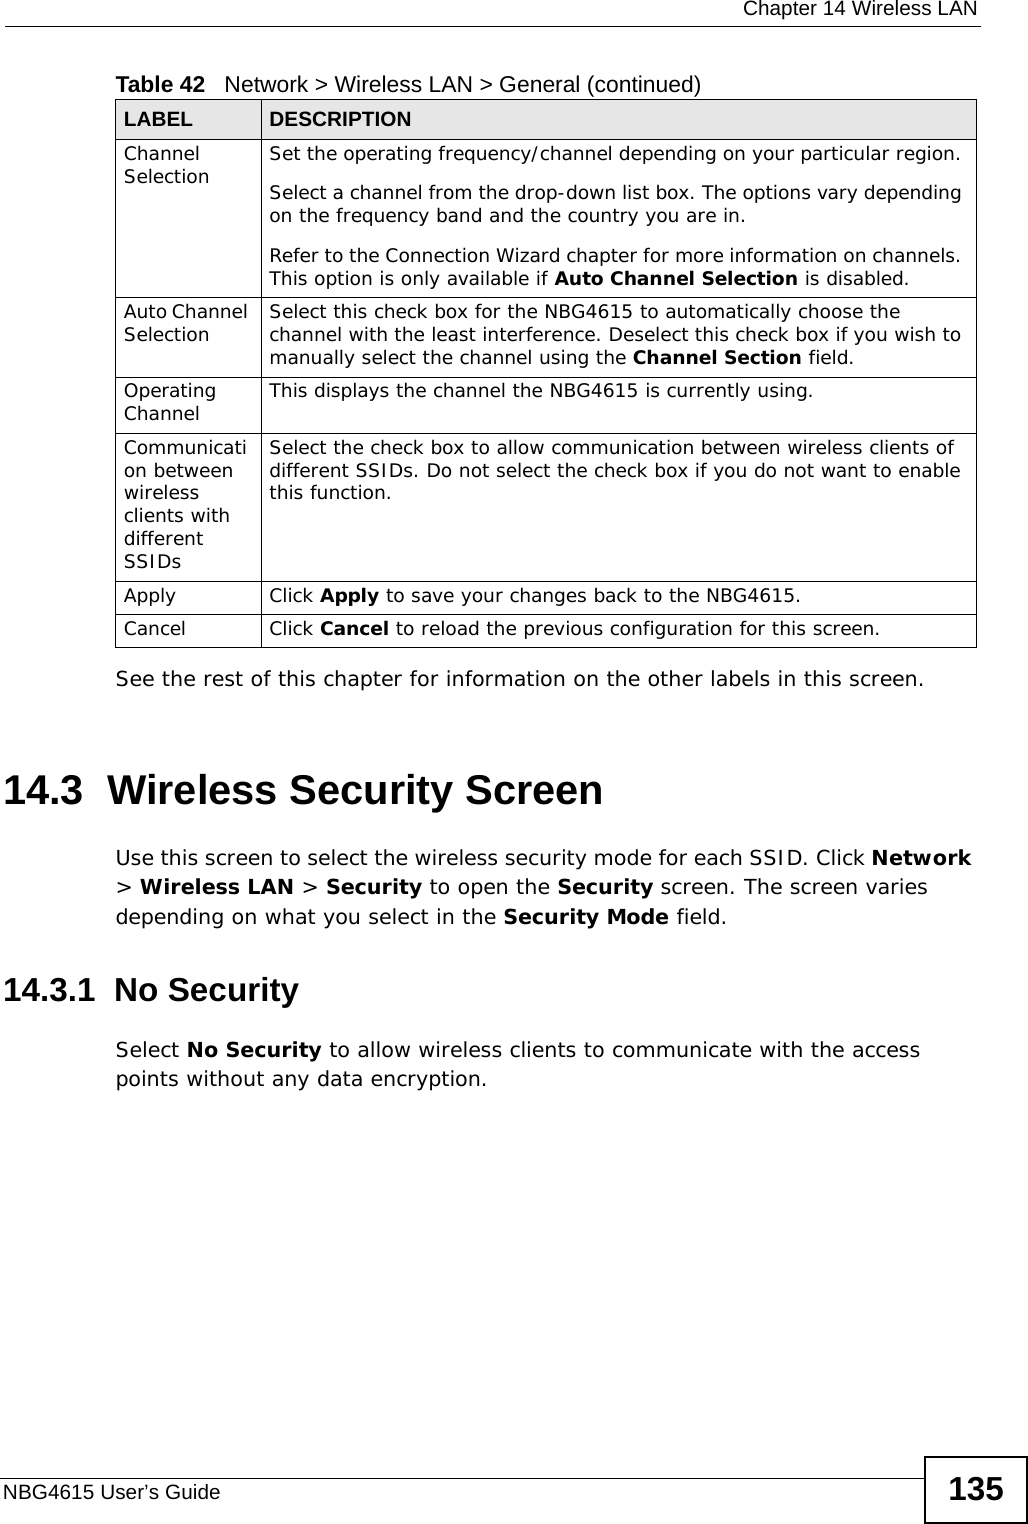  Chapter 14 Wireless LANNBG4615 User’s Guide 135See the rest of this chapter for information on the other labels in this screen. 14.3  Wireless Security ScreenUse this screen to select the wireless security mode for each SSID. Click Network &gt; Wireless LAN &gt; Security to open the Security screen. The screen varies depending on what you select in the Security Mode field.14.3.1  No SecuritySelect No Security to allow wireless clients to communicate with the access points without any data encryption.Channel Selection Set the operating frequency/channel depending on your particular region. Select a channel from the drop-down list box. The options vary depending on the frequency band and the country you are in.Refer to the Connection Wizard chapter for more information on channels. This option is only available if Auto Channel Selection is disabled.Auto Channel Selection Select this check box for the NBG4615 to automatically choose the channel with the least interference. Deselect this check box if you wish to manually select the channel using the Channel Section field.Operating Channel  This displays the channel the NBG4615 is currently using.Communication between wireless clients with different SSIDs Select the check box to allow communication between wireless clients of different SSIDs. Do not select the check box if you do not want to enable this function.Apply Click Apply to save your changes back to the NBG4615.Cancel Click Cancel to reload the previous configuration for this screen.Table 42   Network &gt; Wireless LAN &gt; General (continued)LABEL DESCRIPTION